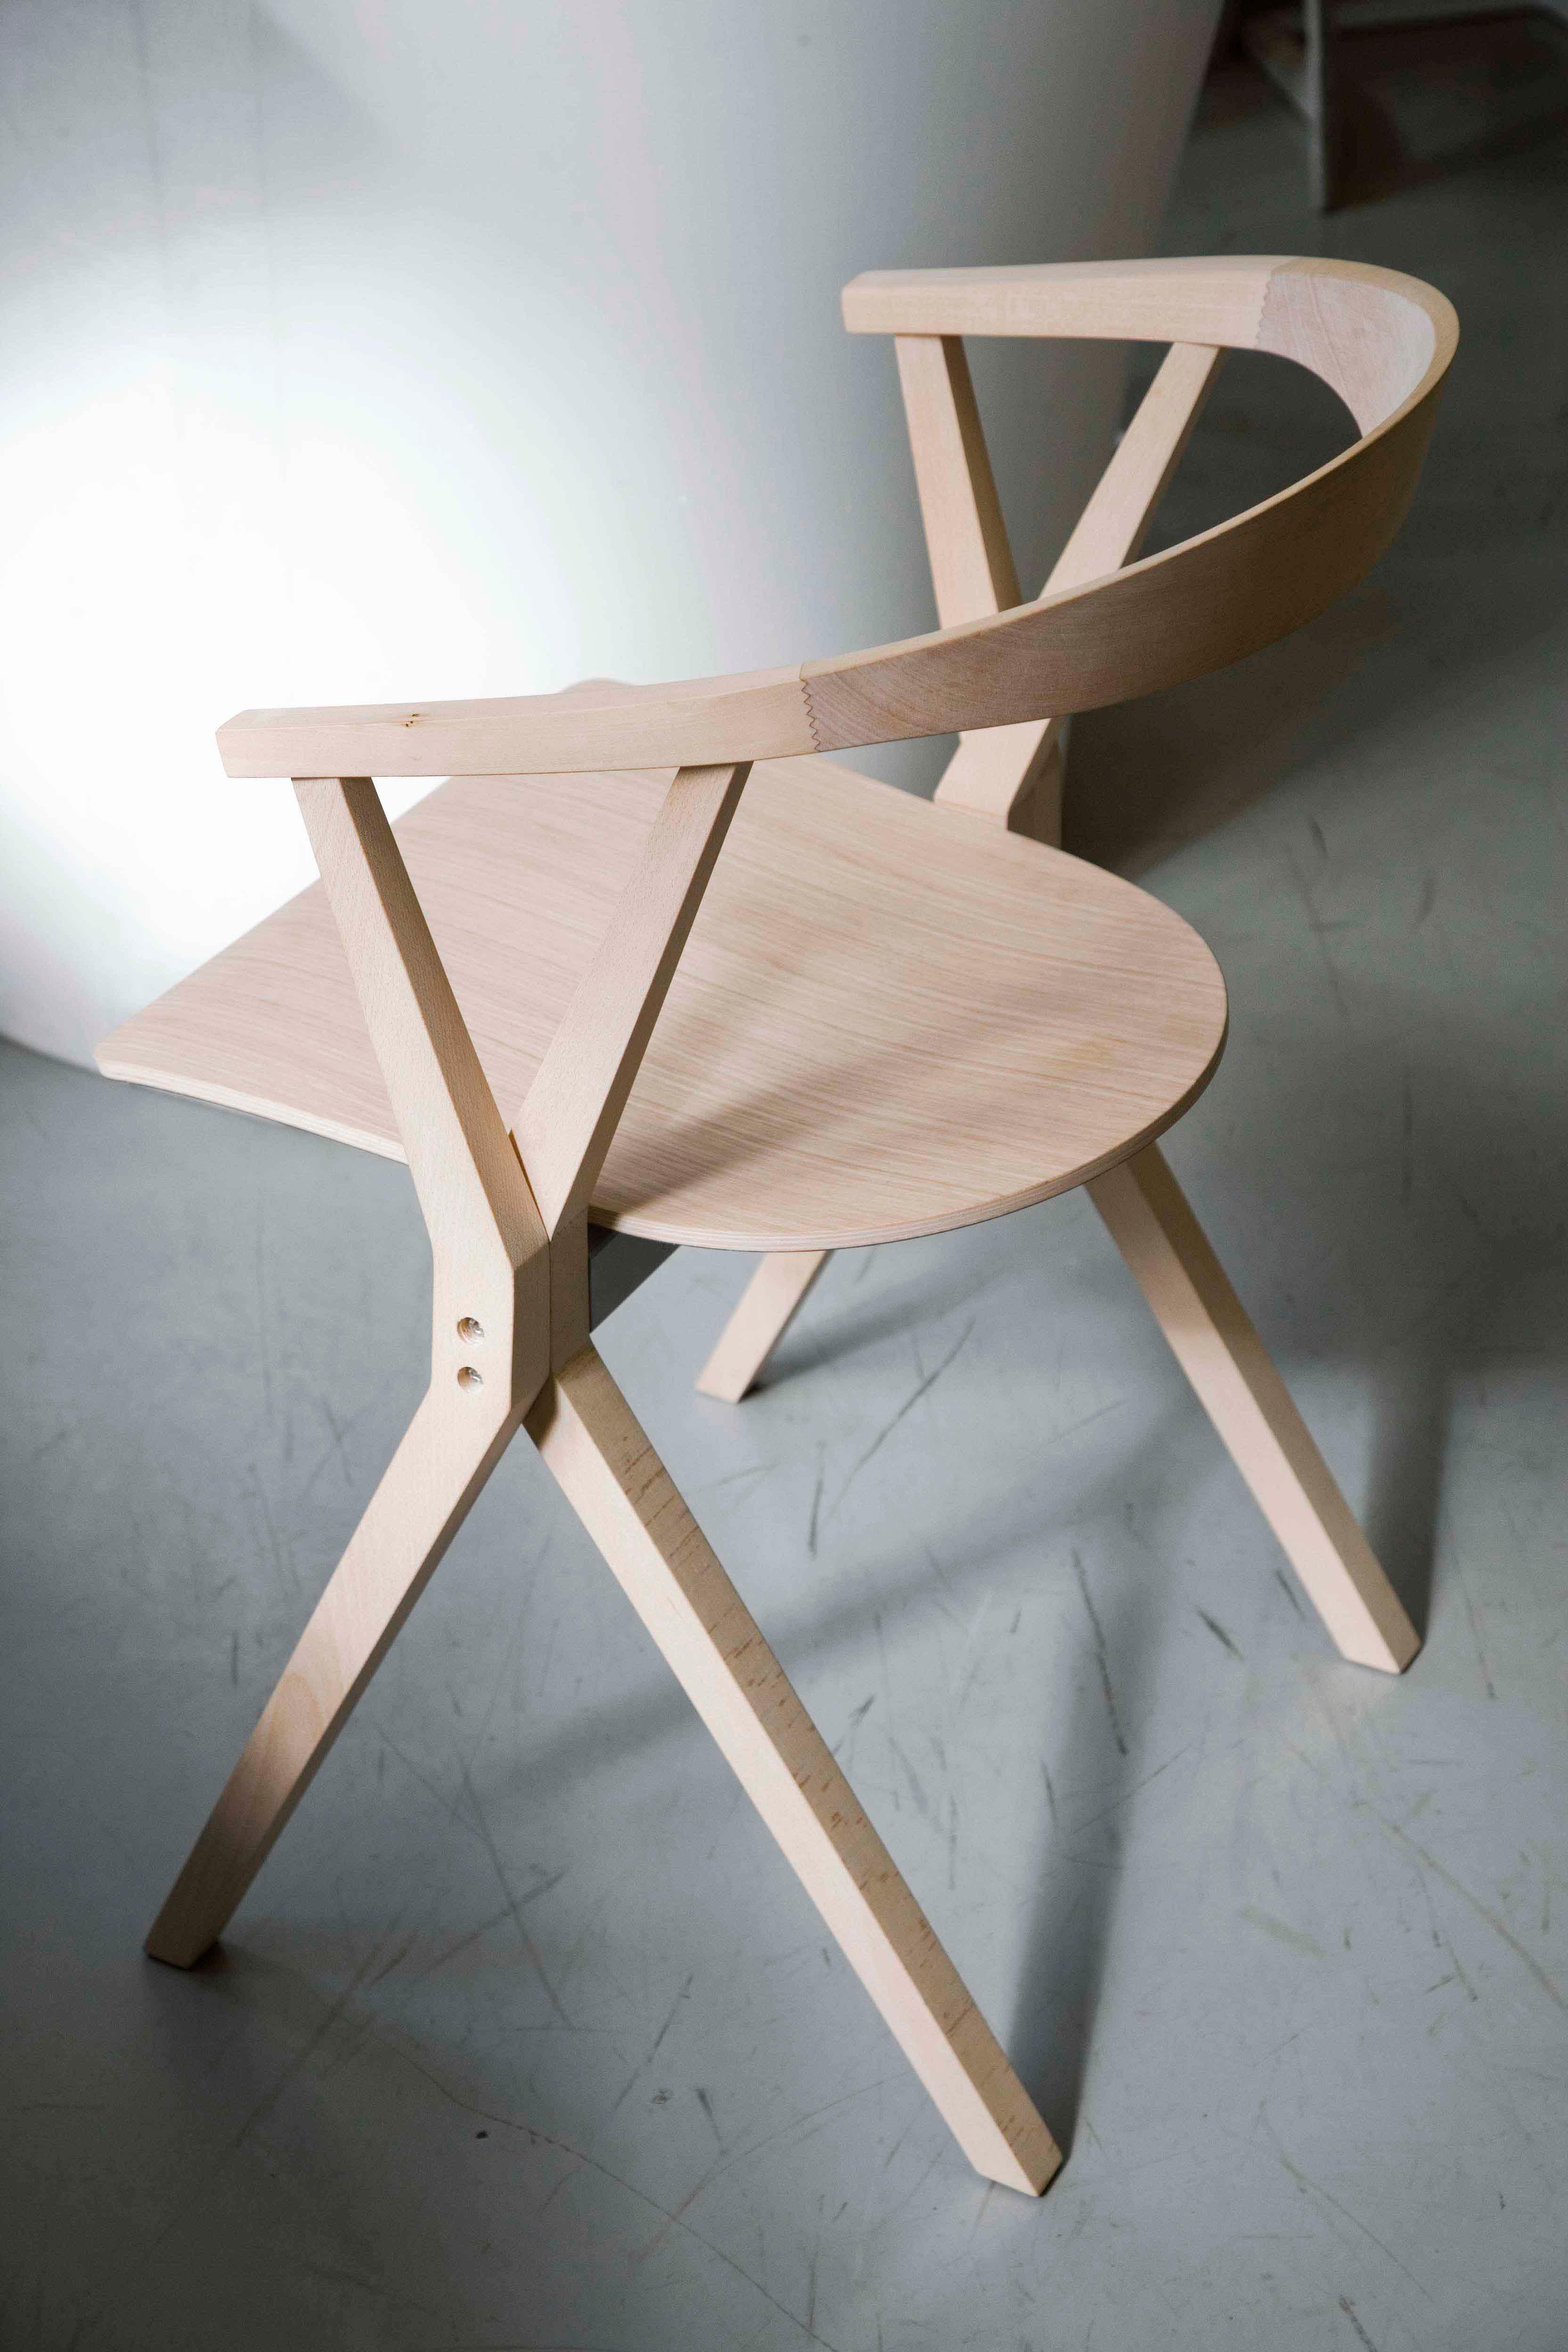 This chair won the ADI-FAD Delta Silver Award in 2011. In its singularity, complex engineering is hidden. The very fact that the seat can be folded up opens the possibilities for the use of this chair in multi-use spaces.

Sides and seat are in